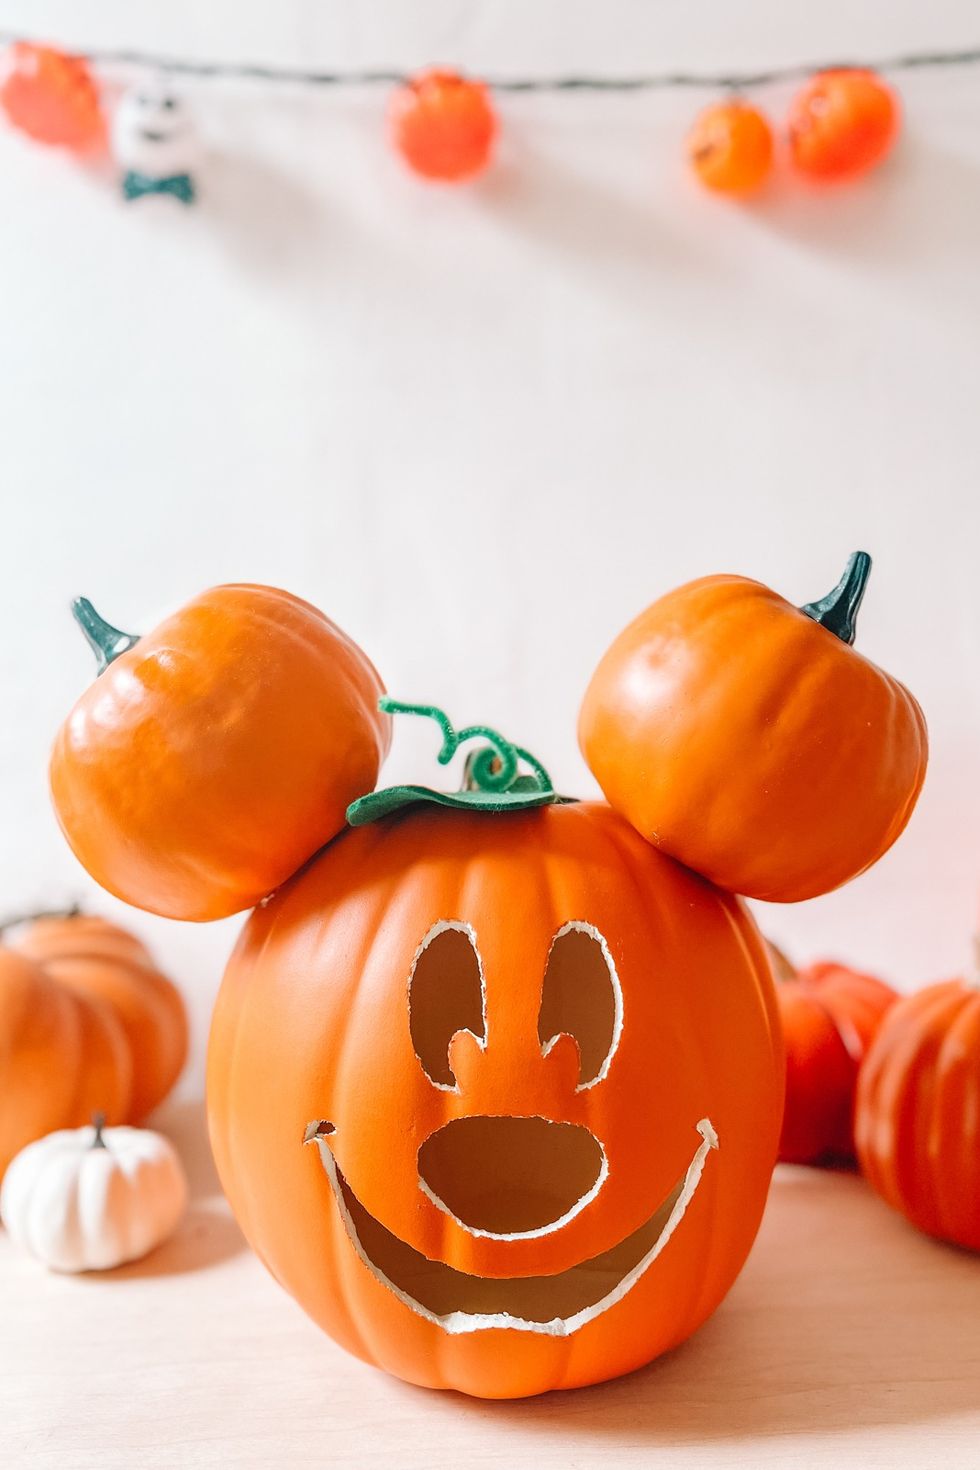 50 Free Printable Pumpkin Carving Stencils and Patterns